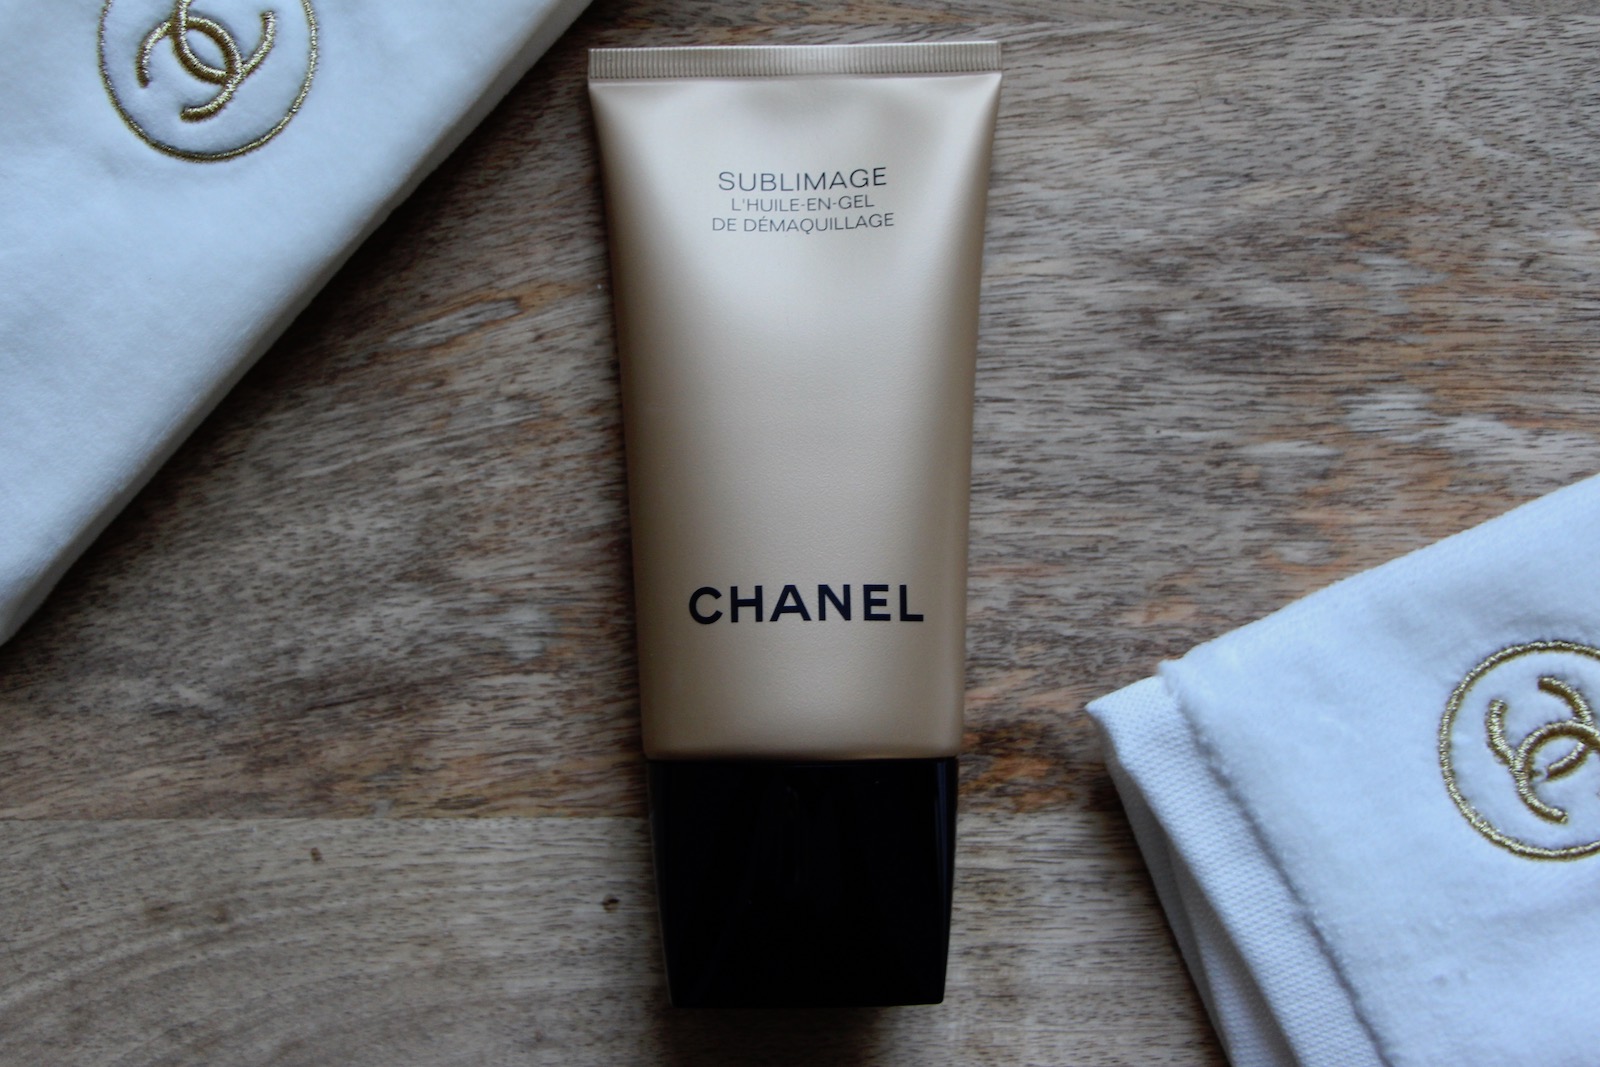 NEW, CHANEL SUBLIMAGE Cleansers, Review